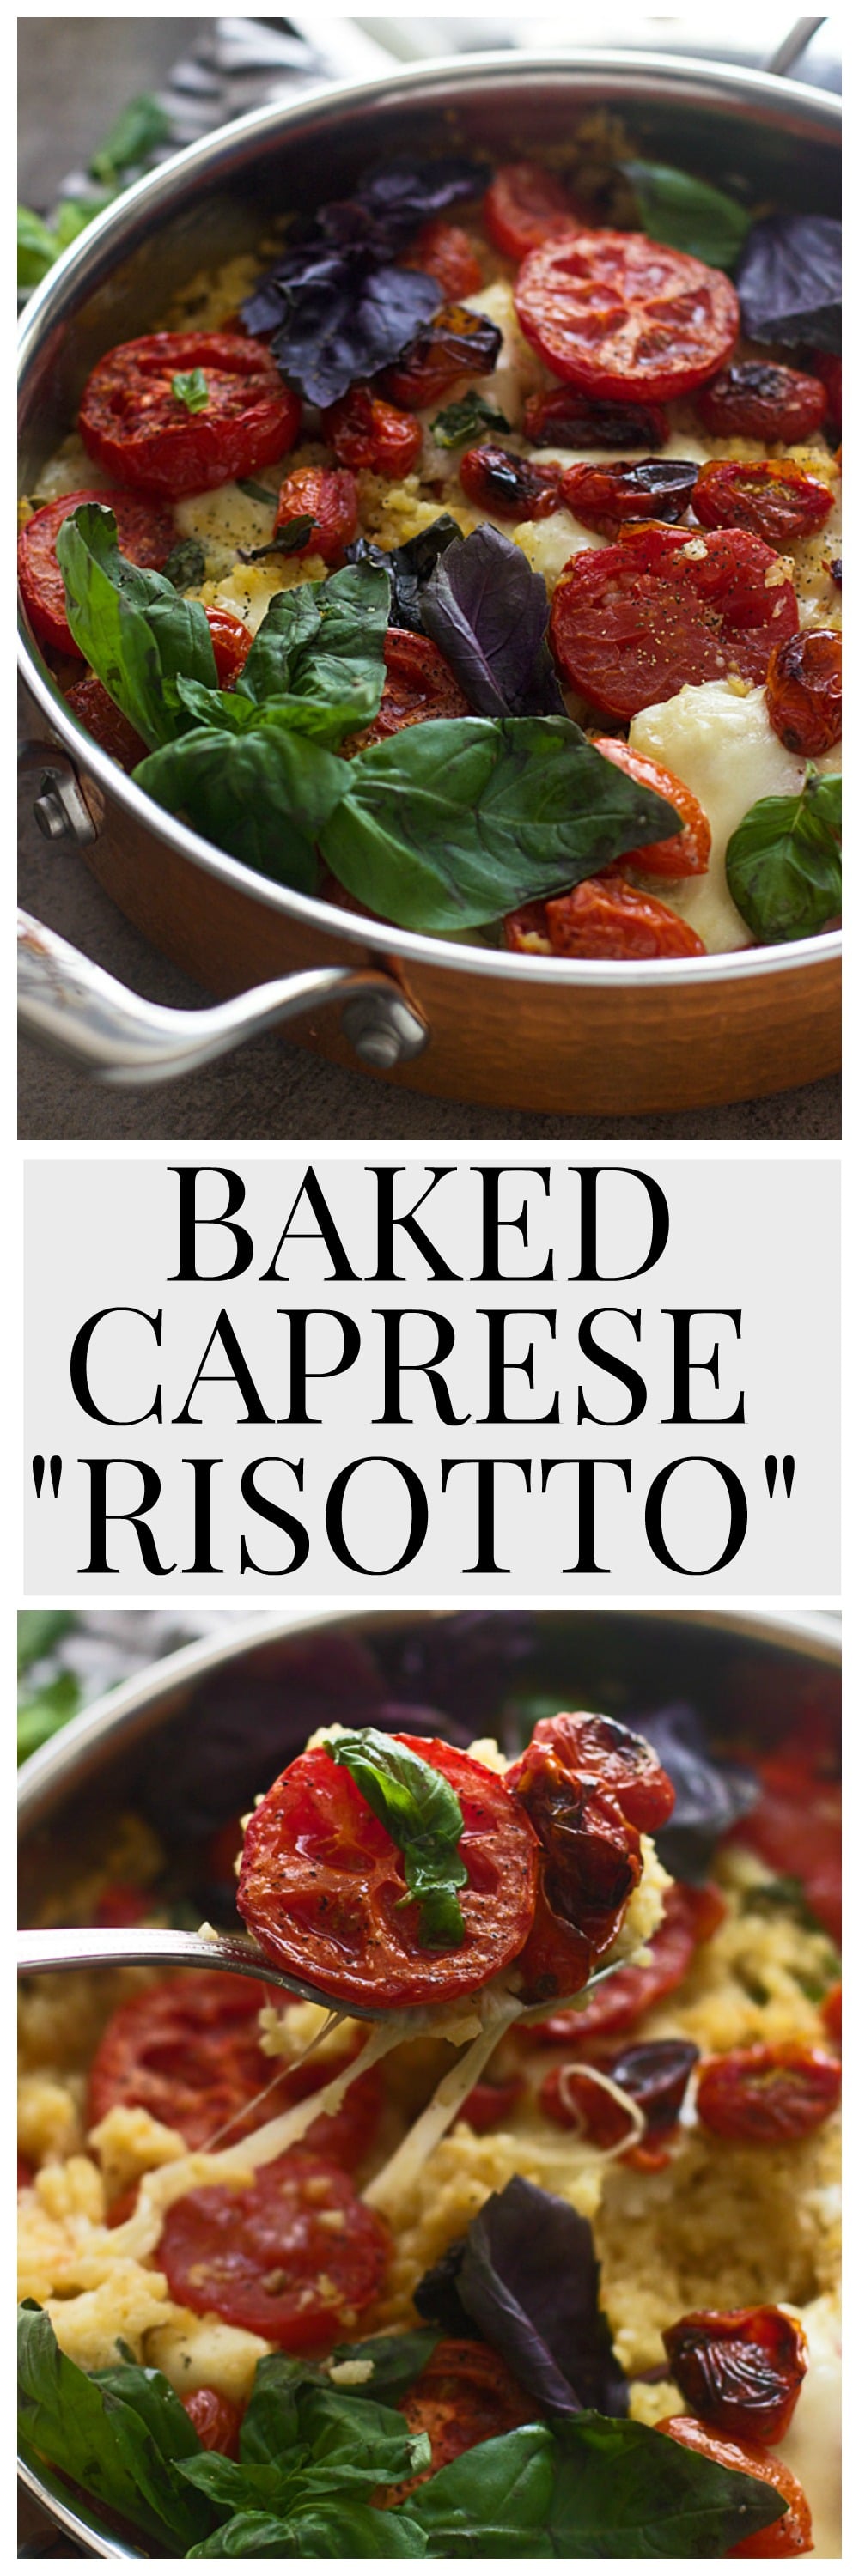 BAKED CAPRESE %22RISOTTO%22 - No more slaving over the stove!